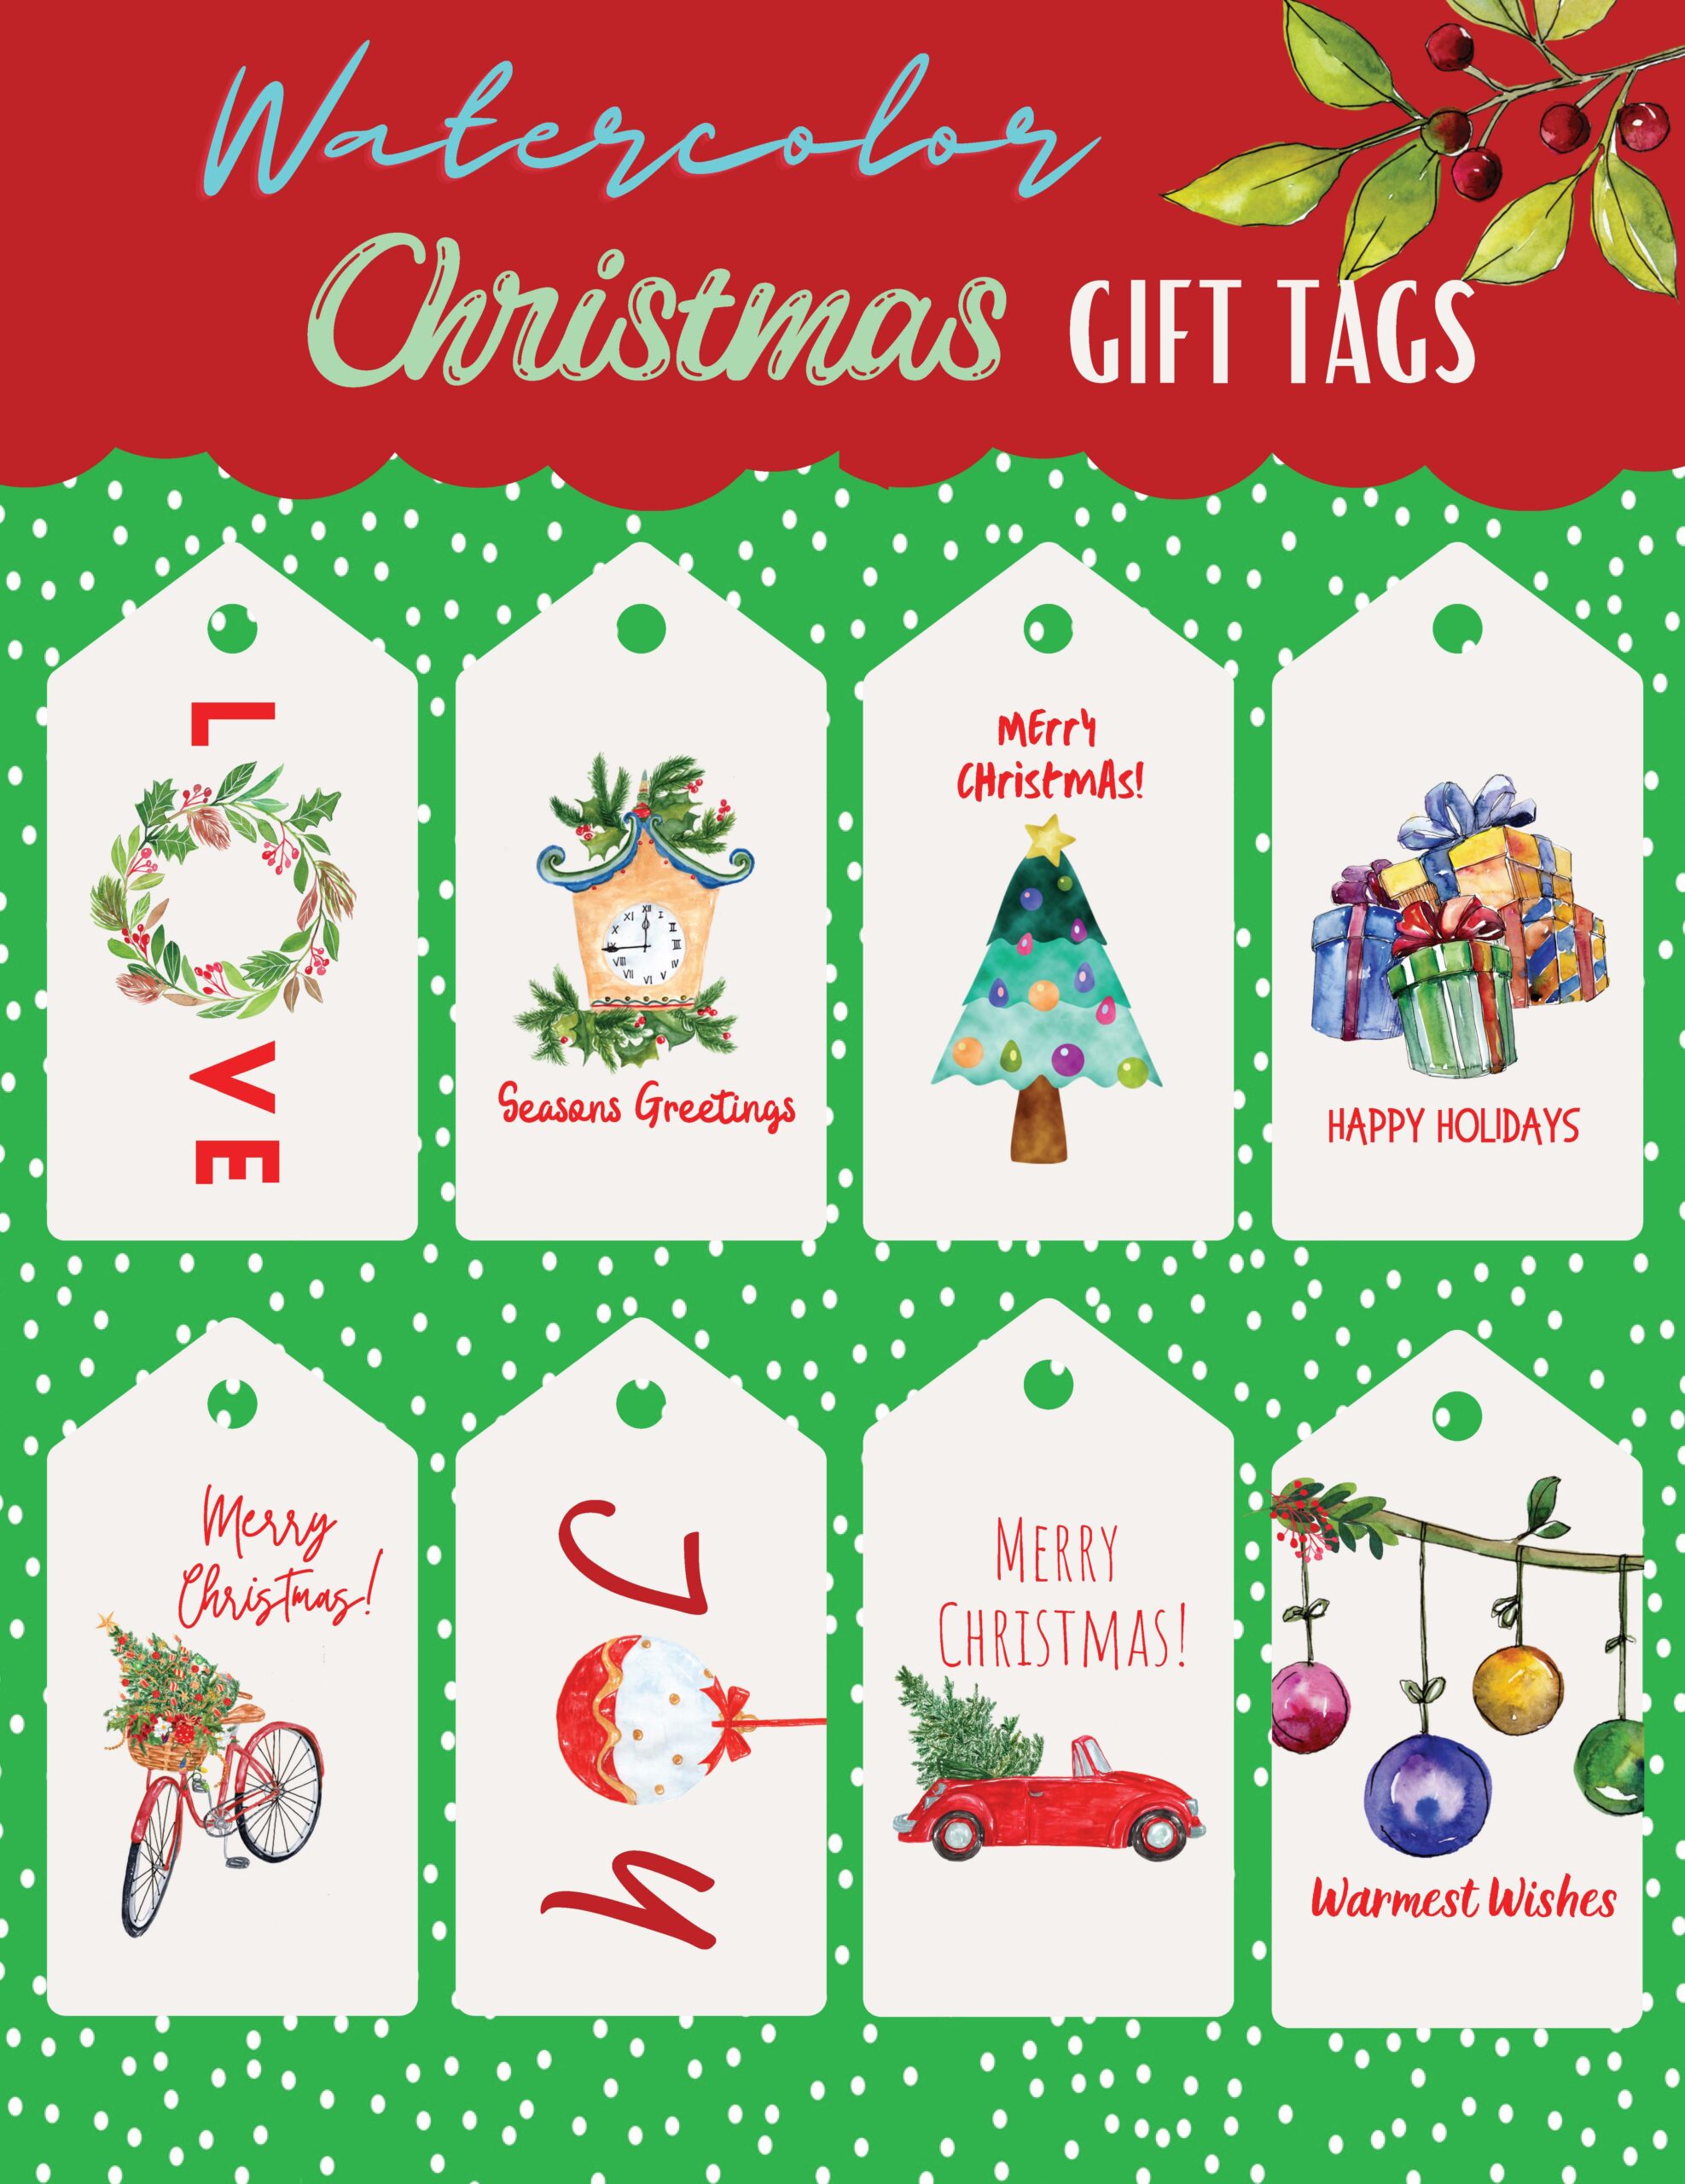 Download our free Christmas gift tags - Photobox Blog